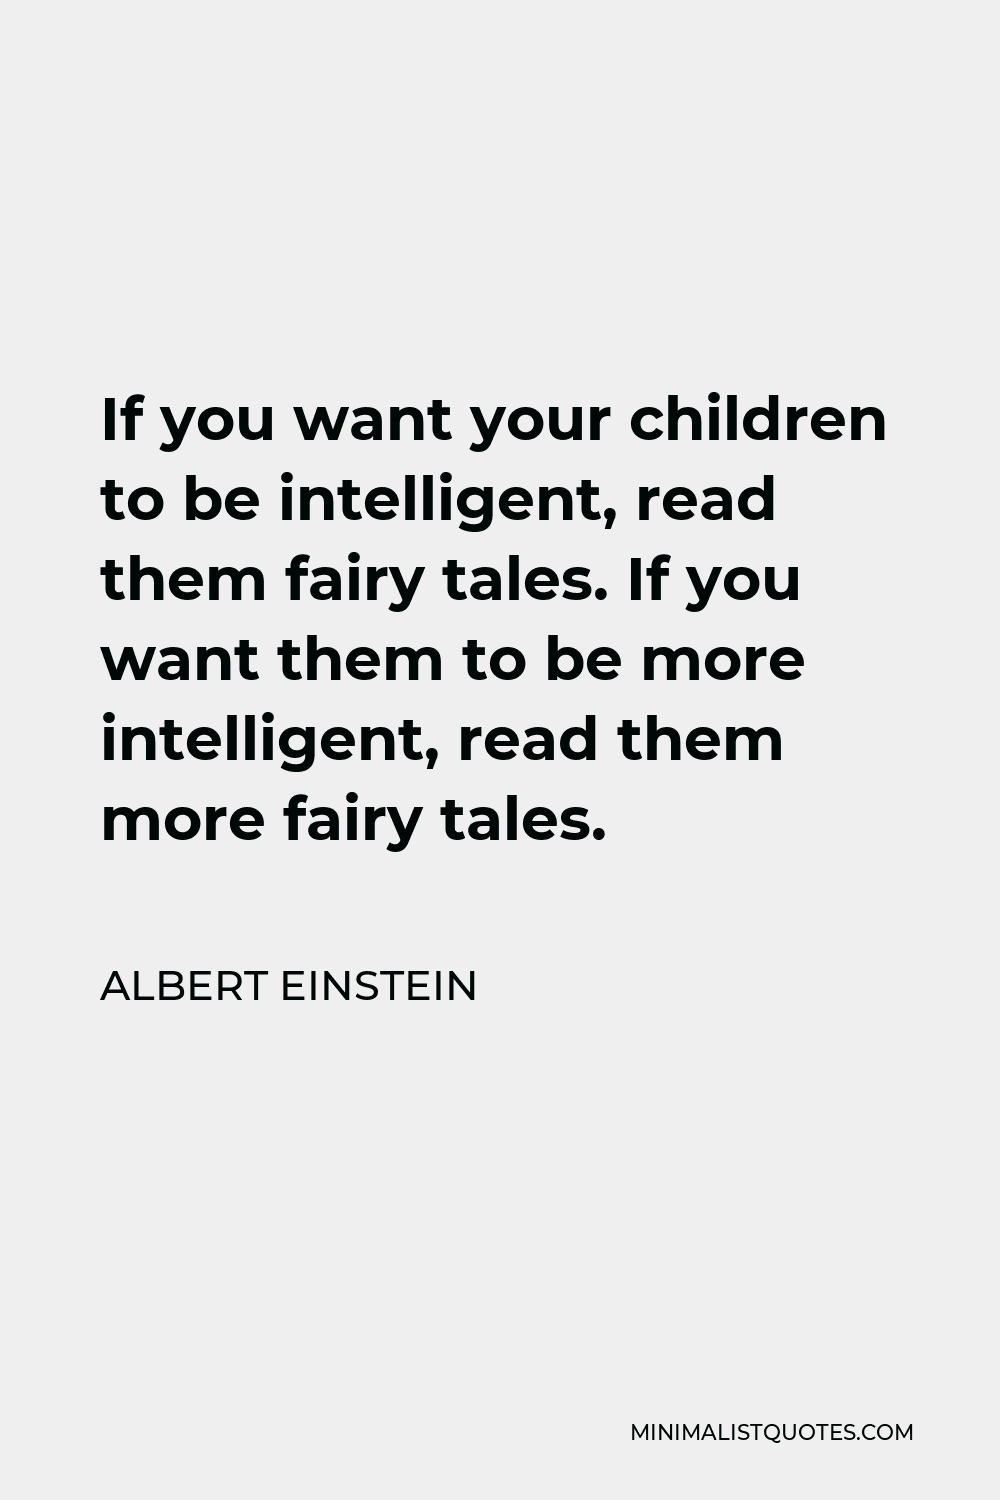 Albert Einstein Quote - If you want your children to be intelligent, read them fairy tales. If you want them to be more intelligent, read them more fairy tales.